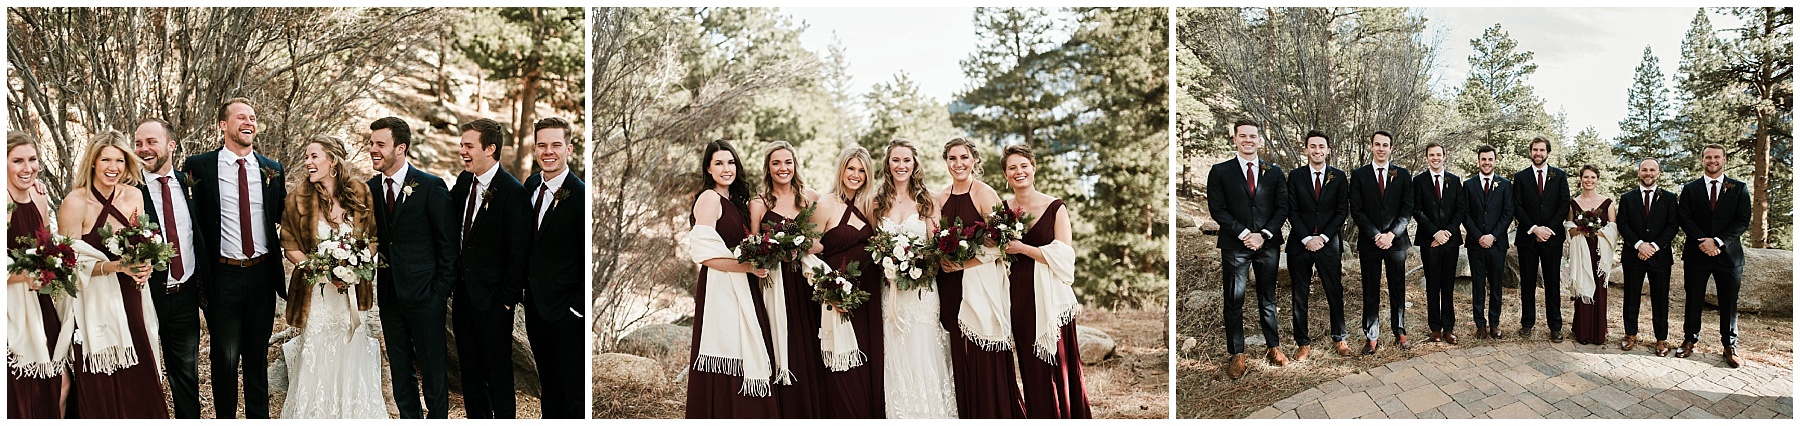 Katesalleyphotography-258_Haley and Dan get married in Estes Park.jpg